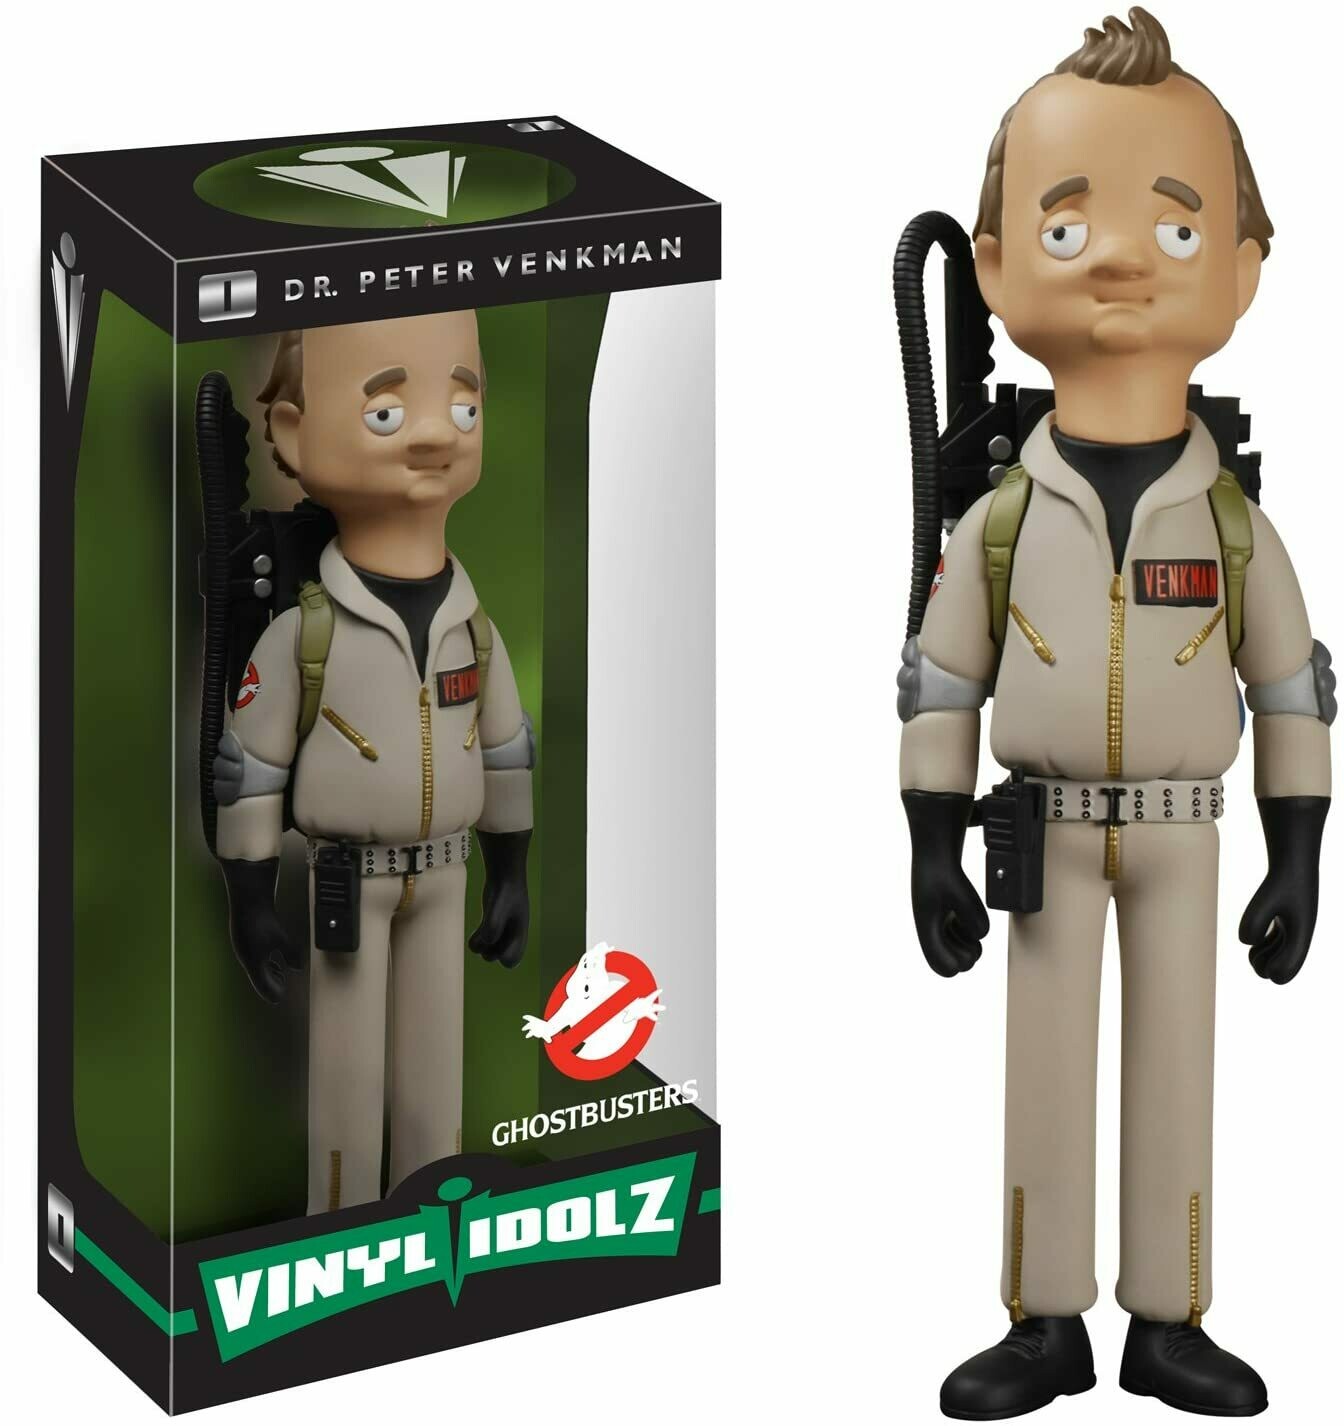 Funko Vinyl Idolz Ghostbusters - Dr. Peter Venkman Action Figure Collectible Toy